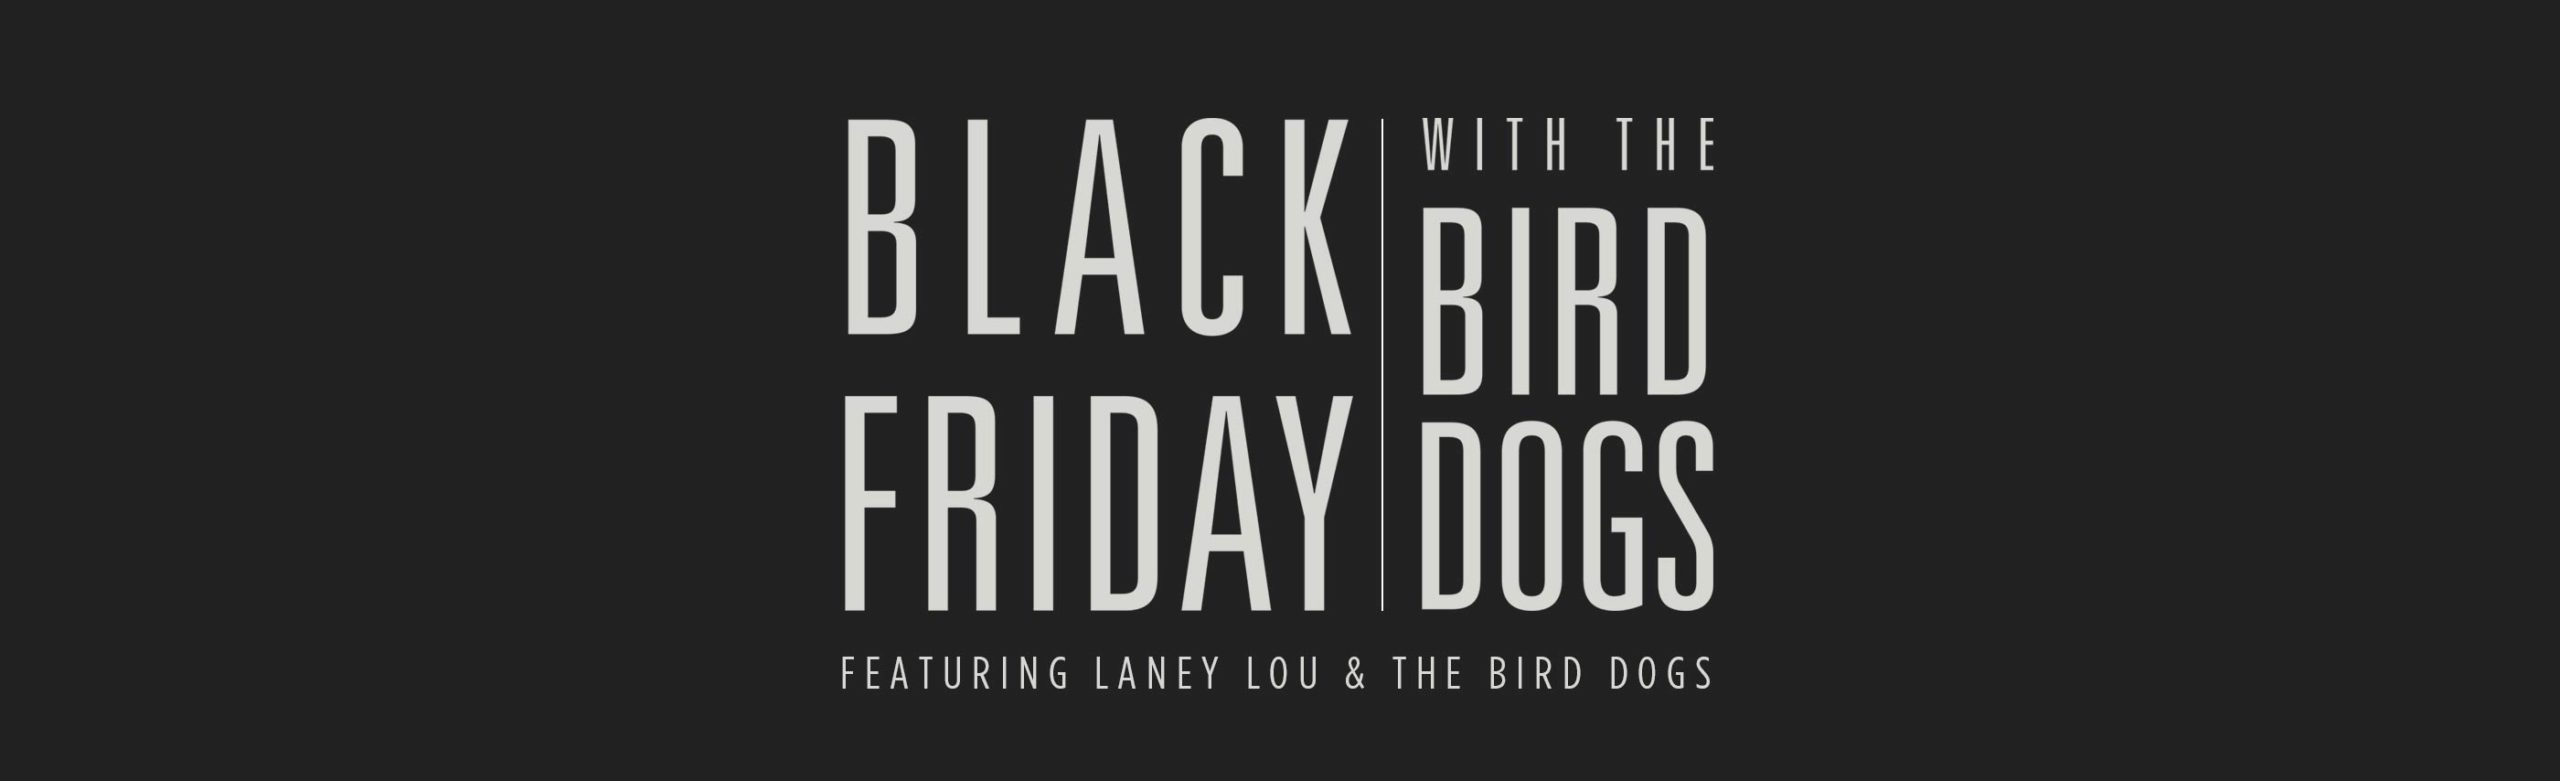 Black Friday w/ The Bird Dogs Ticket, Vinyl and T-Shirt Giveaway Image